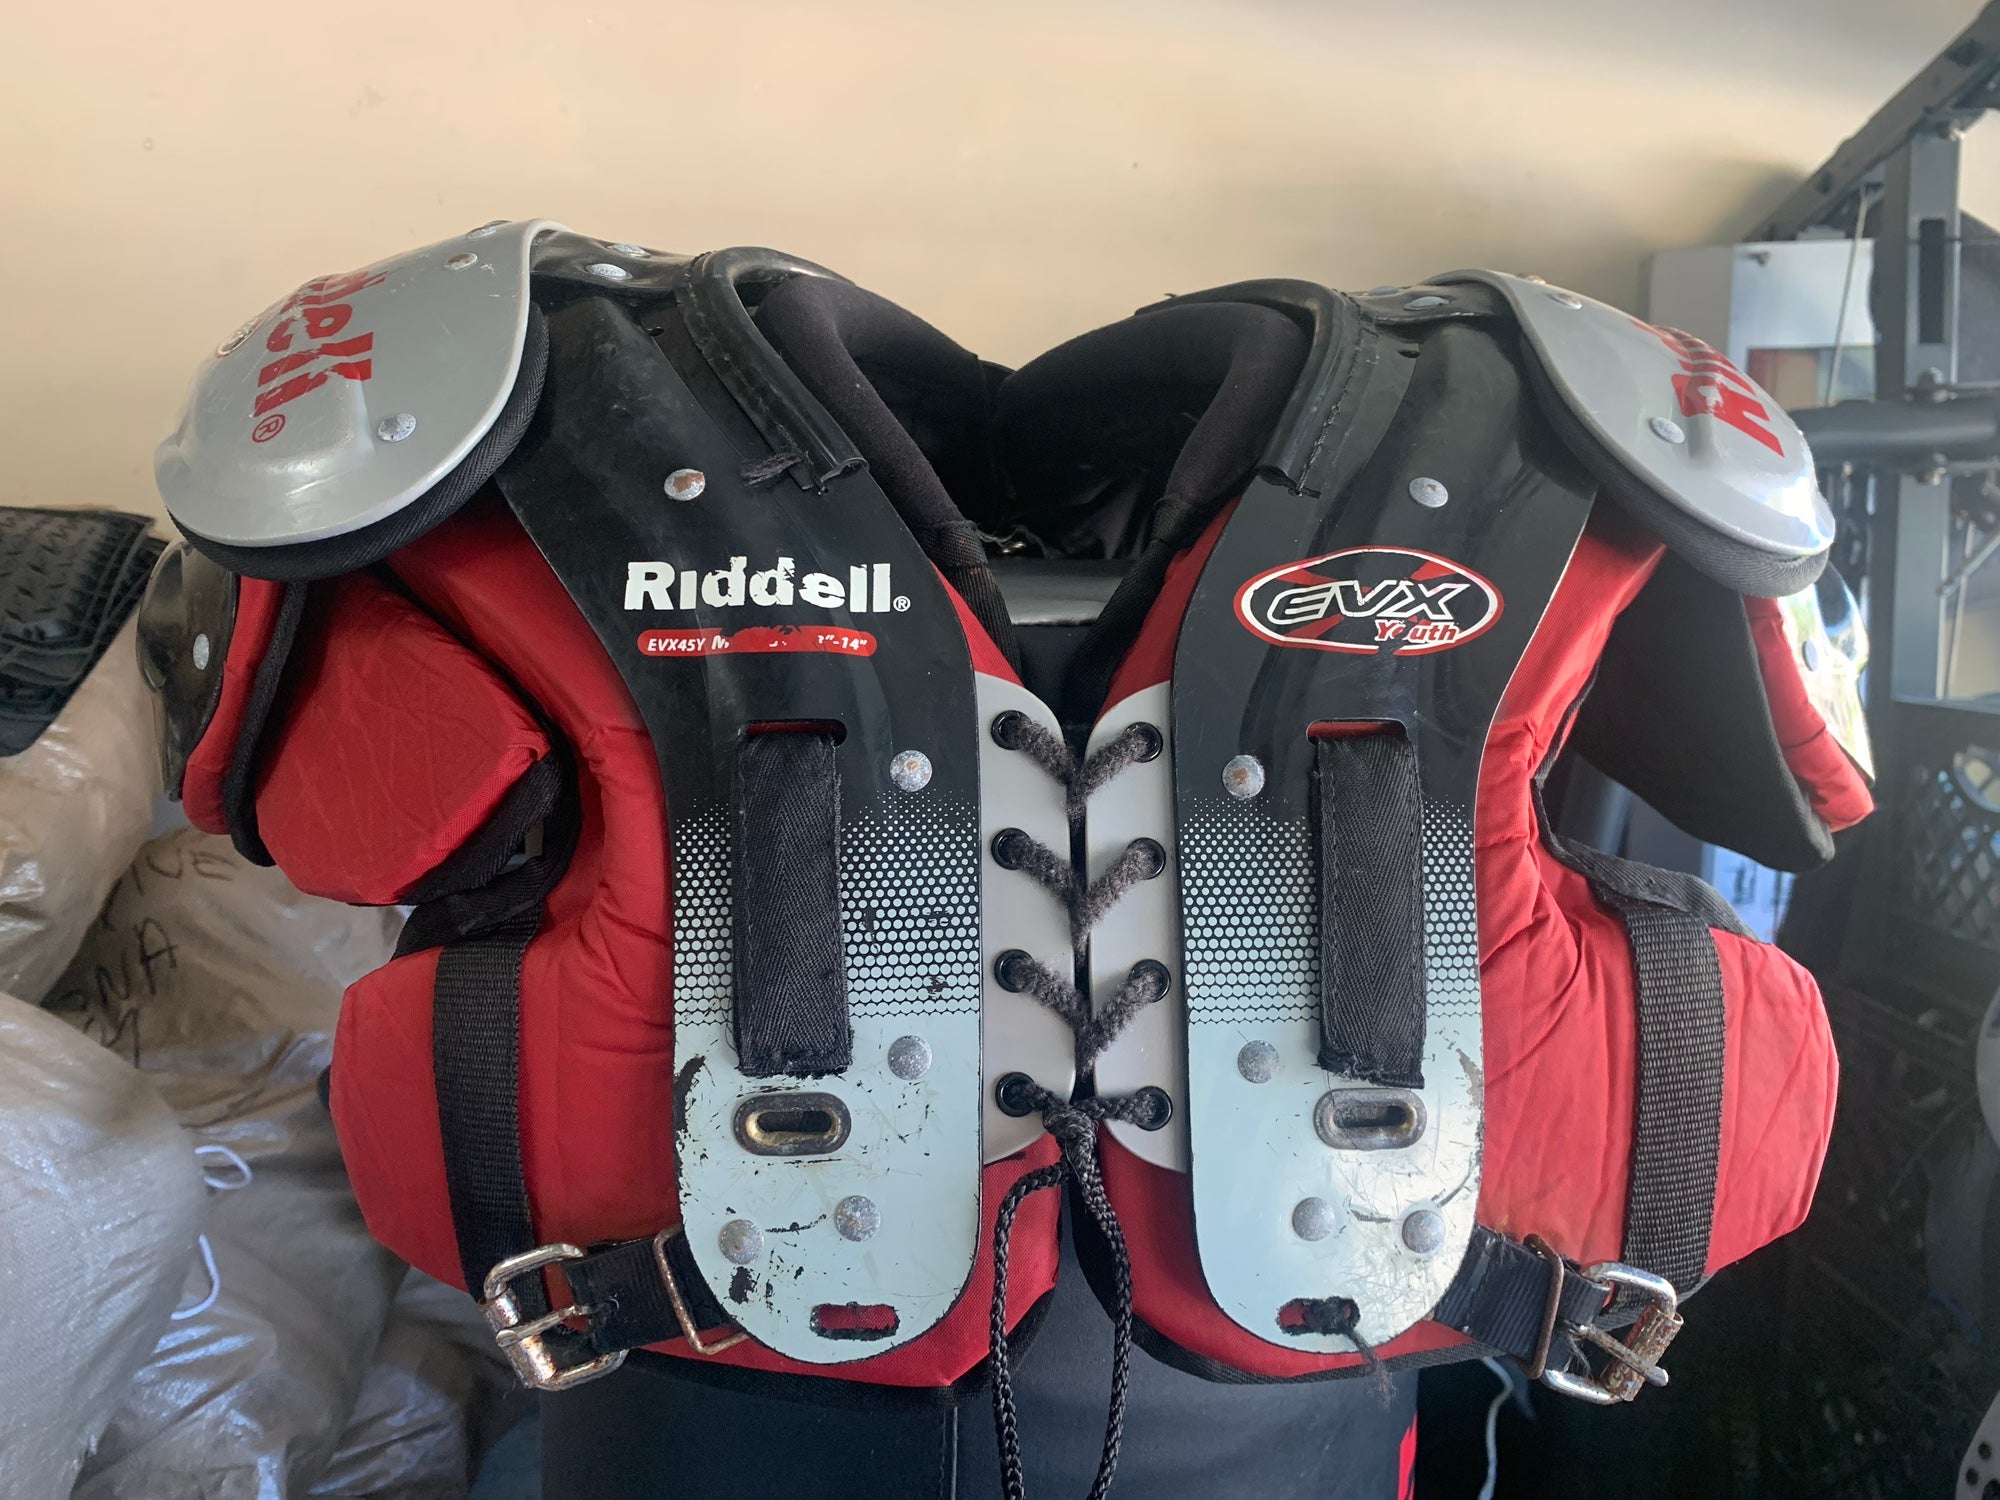 Riddell Football Shoulder Pads for sale | New and Used on SidelineSwap